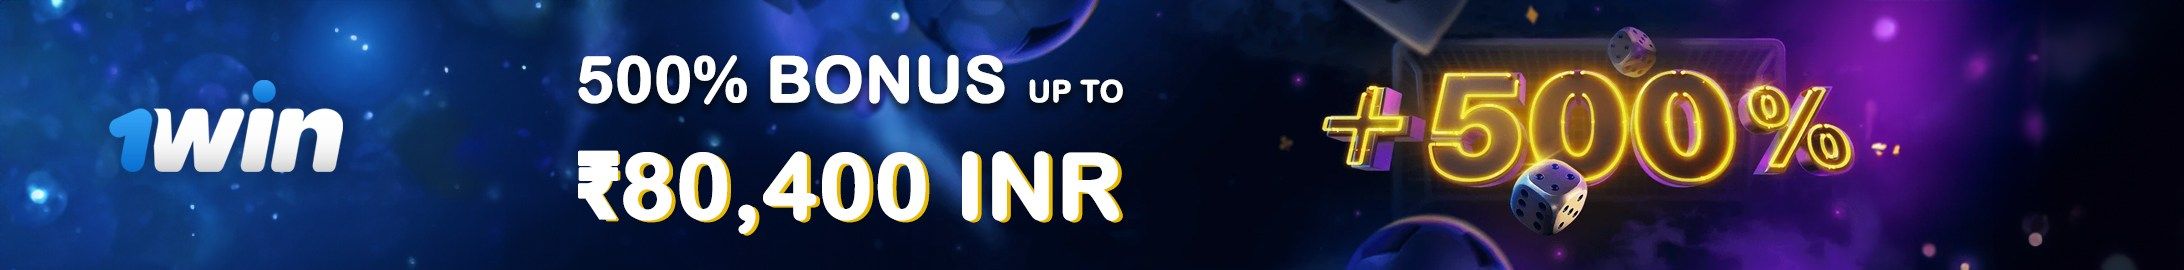 1Win Online Casino and Sports Betting